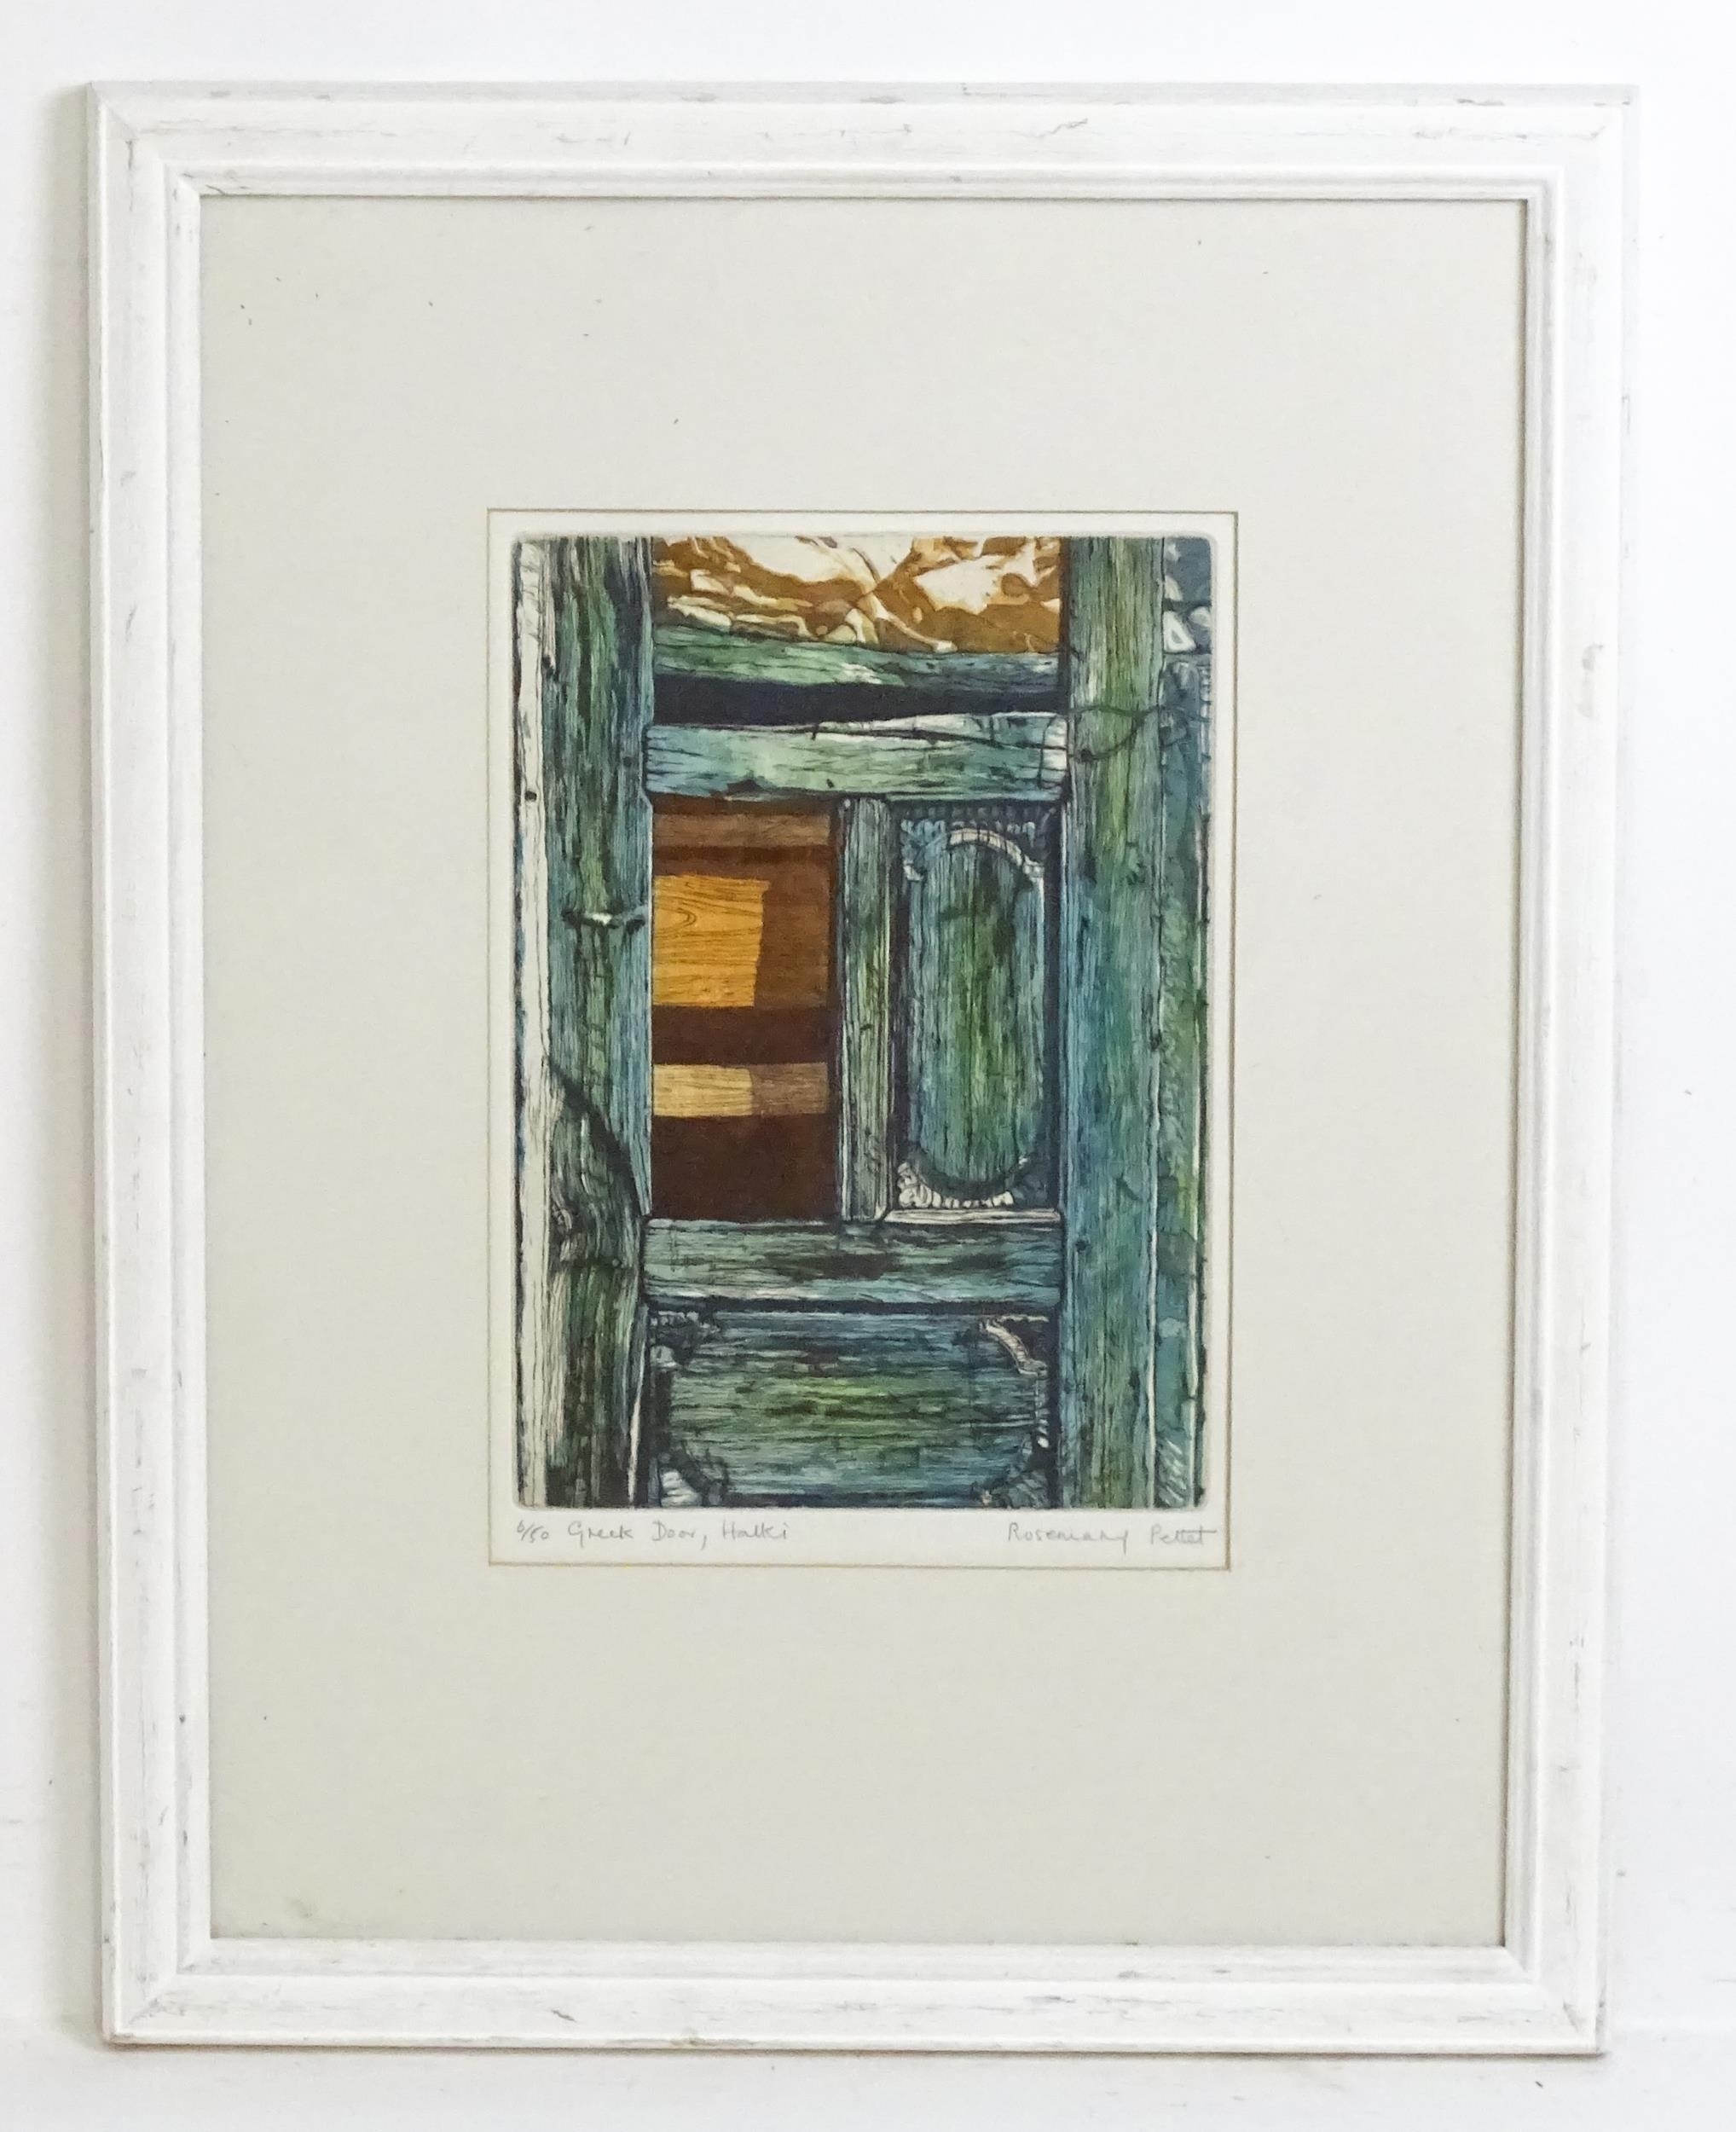 Rosemary Pettet, 20th century, Limited edition colour etching, Greek Door, Halki. Signed, titled and